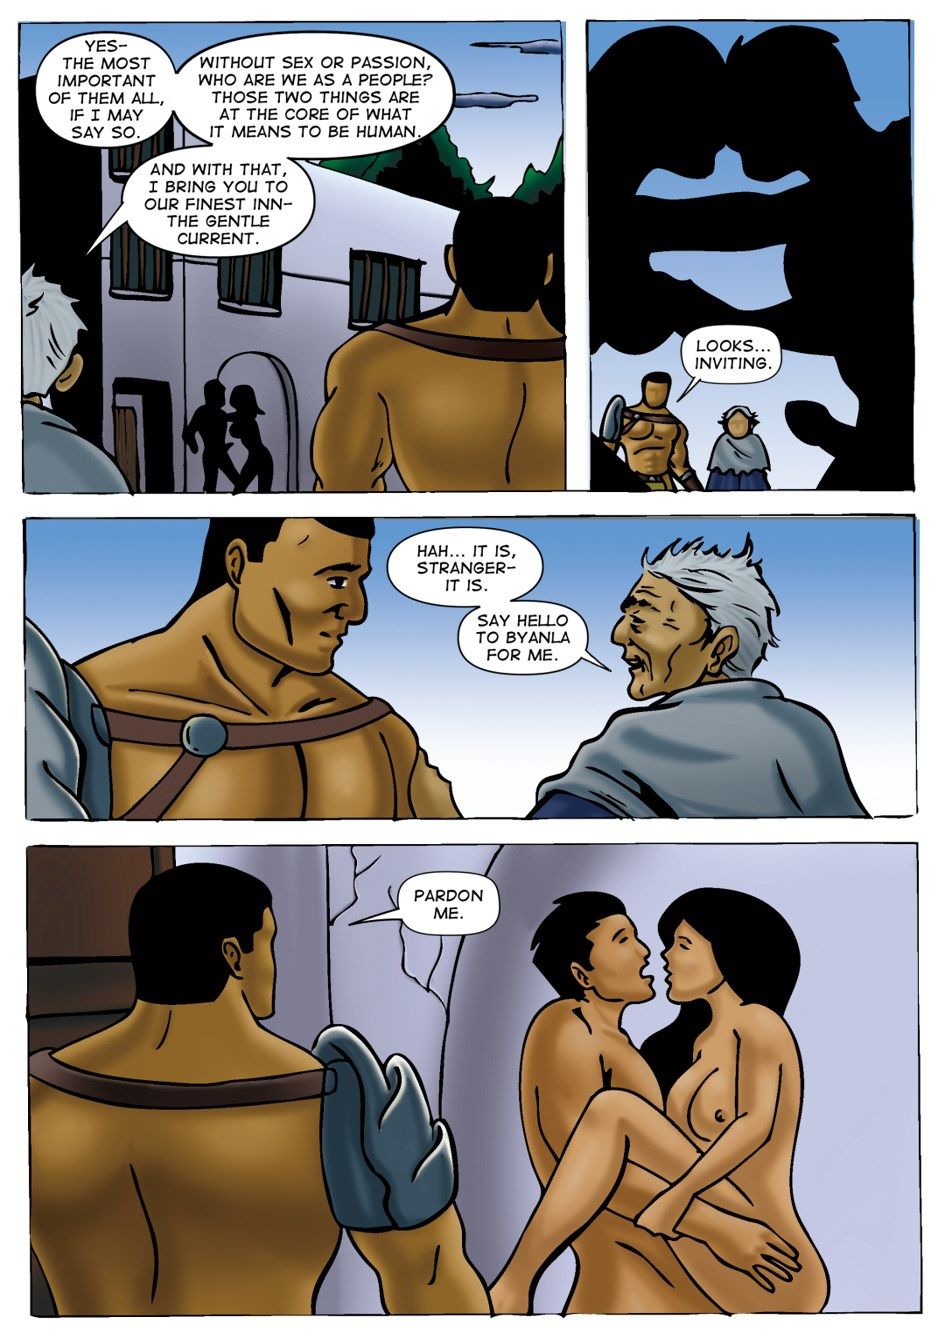 Conquests of Semal P Faffel page 20